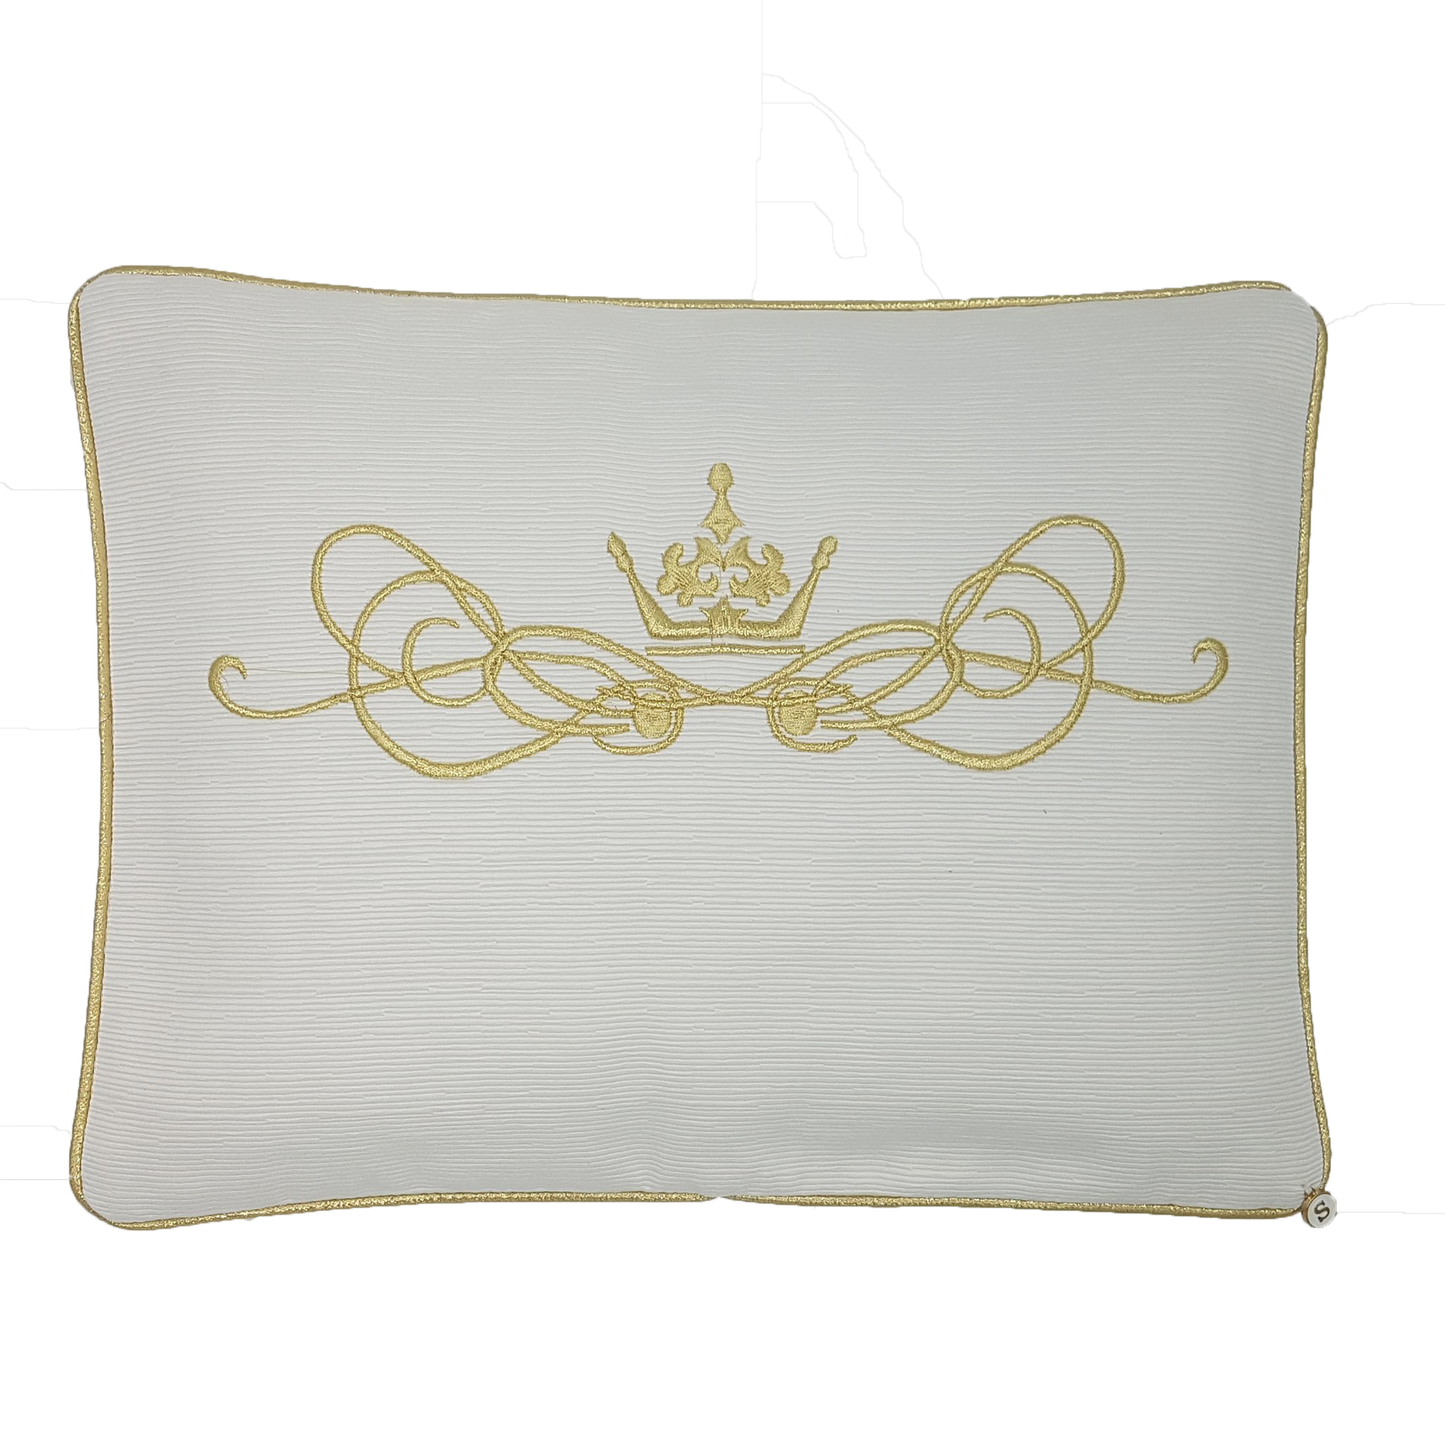 'My Oh My' Golden Crown Embroidered Pillowcase - Gold on Ivory